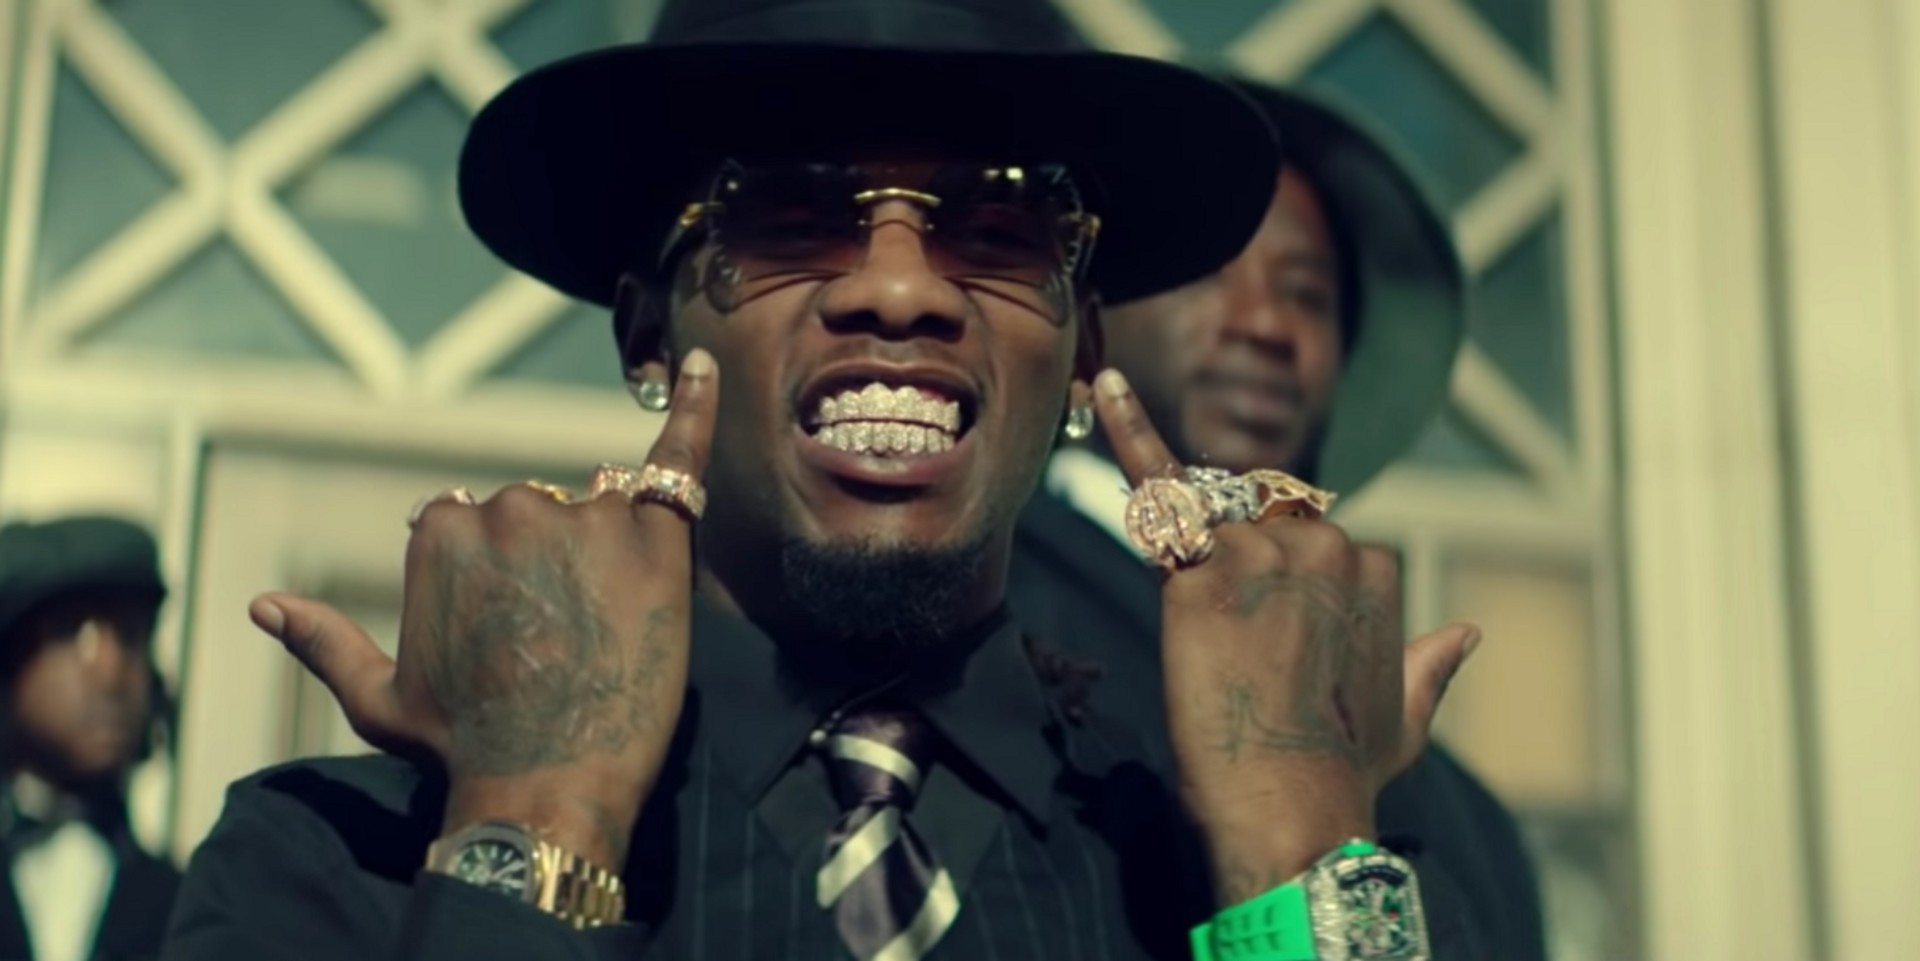 Offset and Gucci Mane are old-timey bank robbers in music video for 'Quarter Milli' – watch